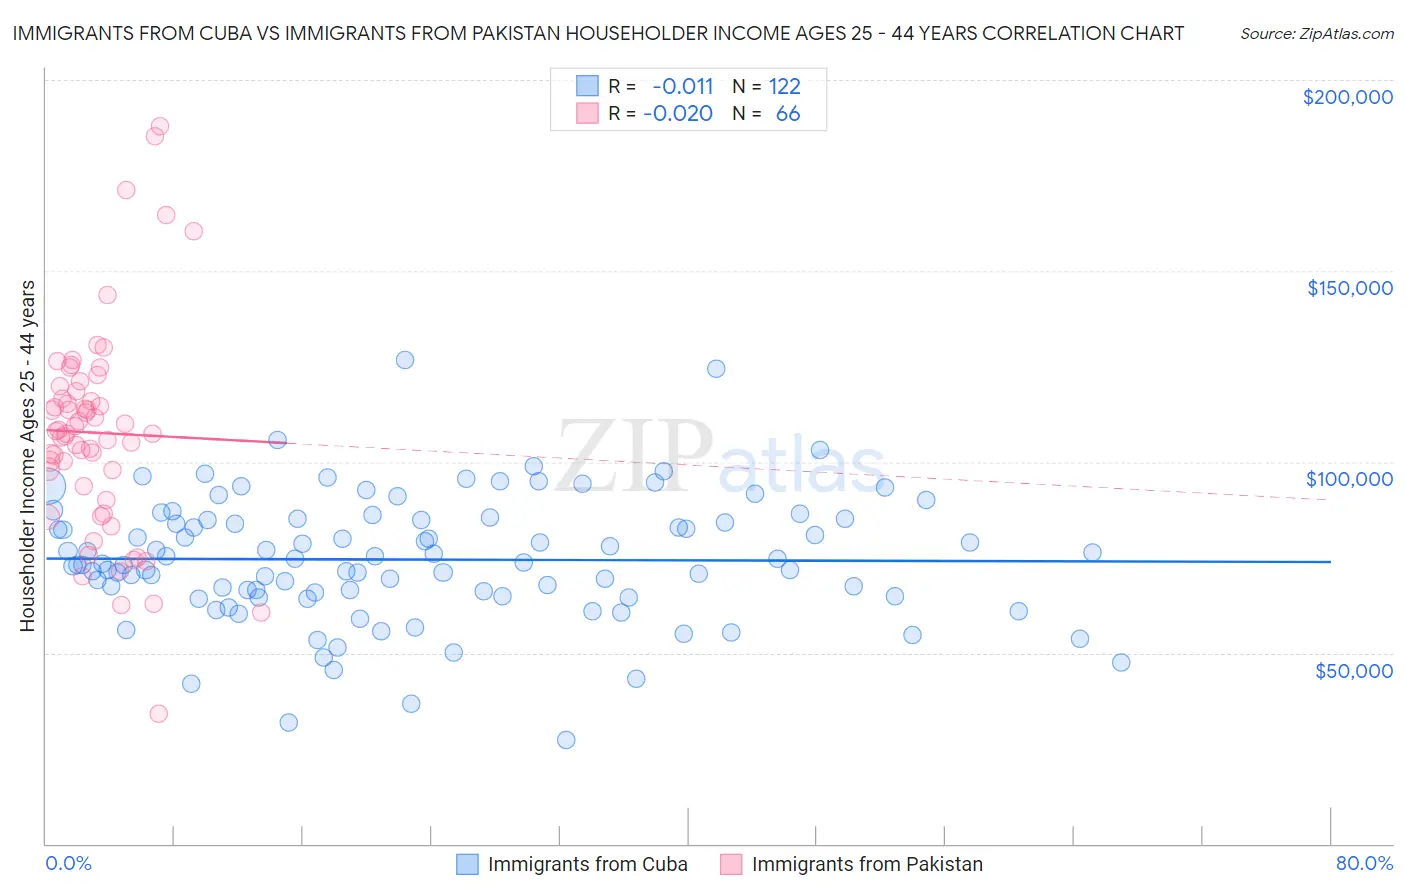 Immigrants from Cuba vs Immigrants from Pakistan Householder Income Ages 25 - 44 years